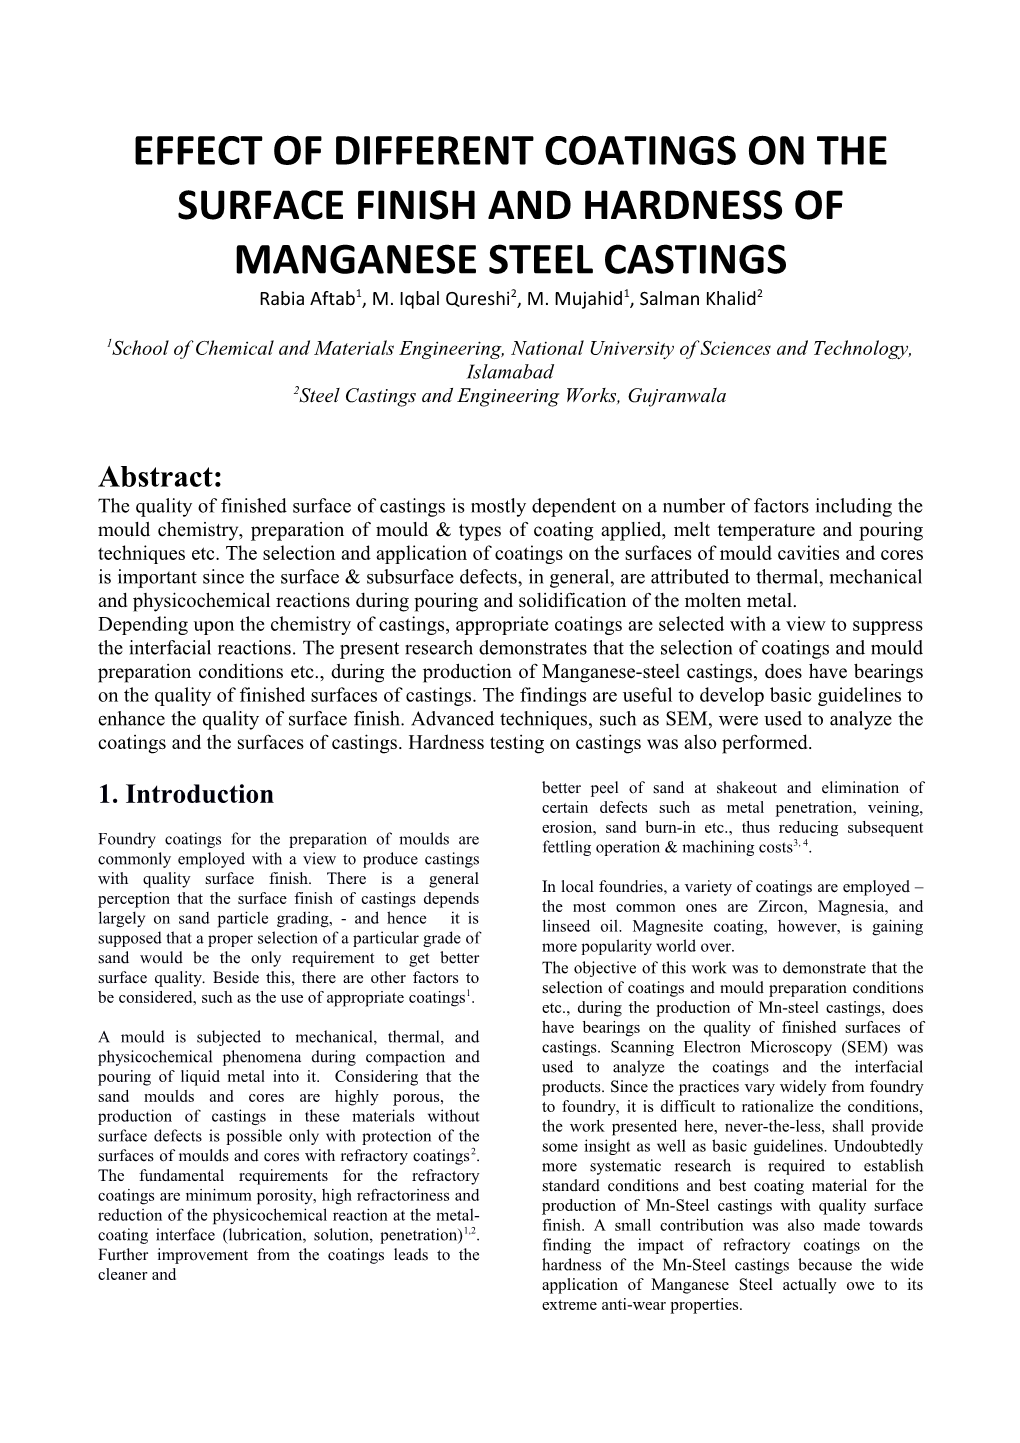 Effect of Different Coatings on the Surface Finish and Hardness of Manganese Steel Castings